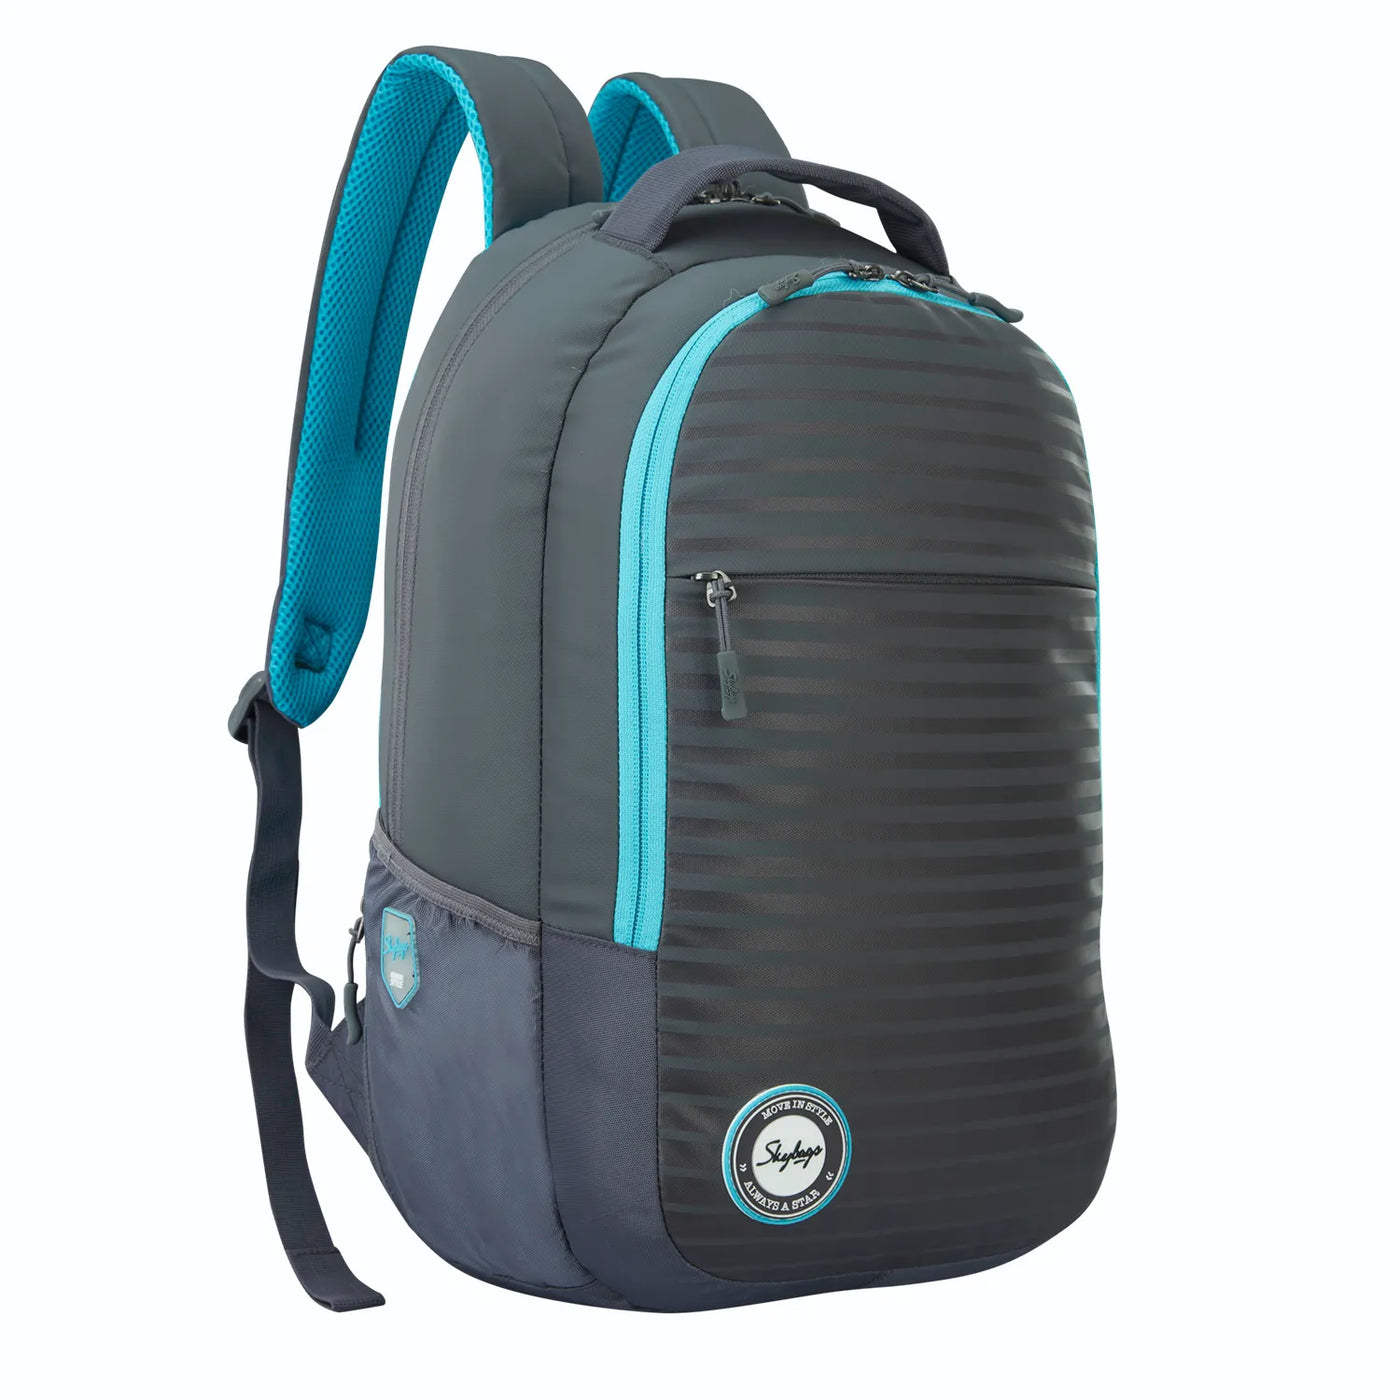 SKYBAGS CAMPUS "01 LAPTOP BACKPACK GREY"